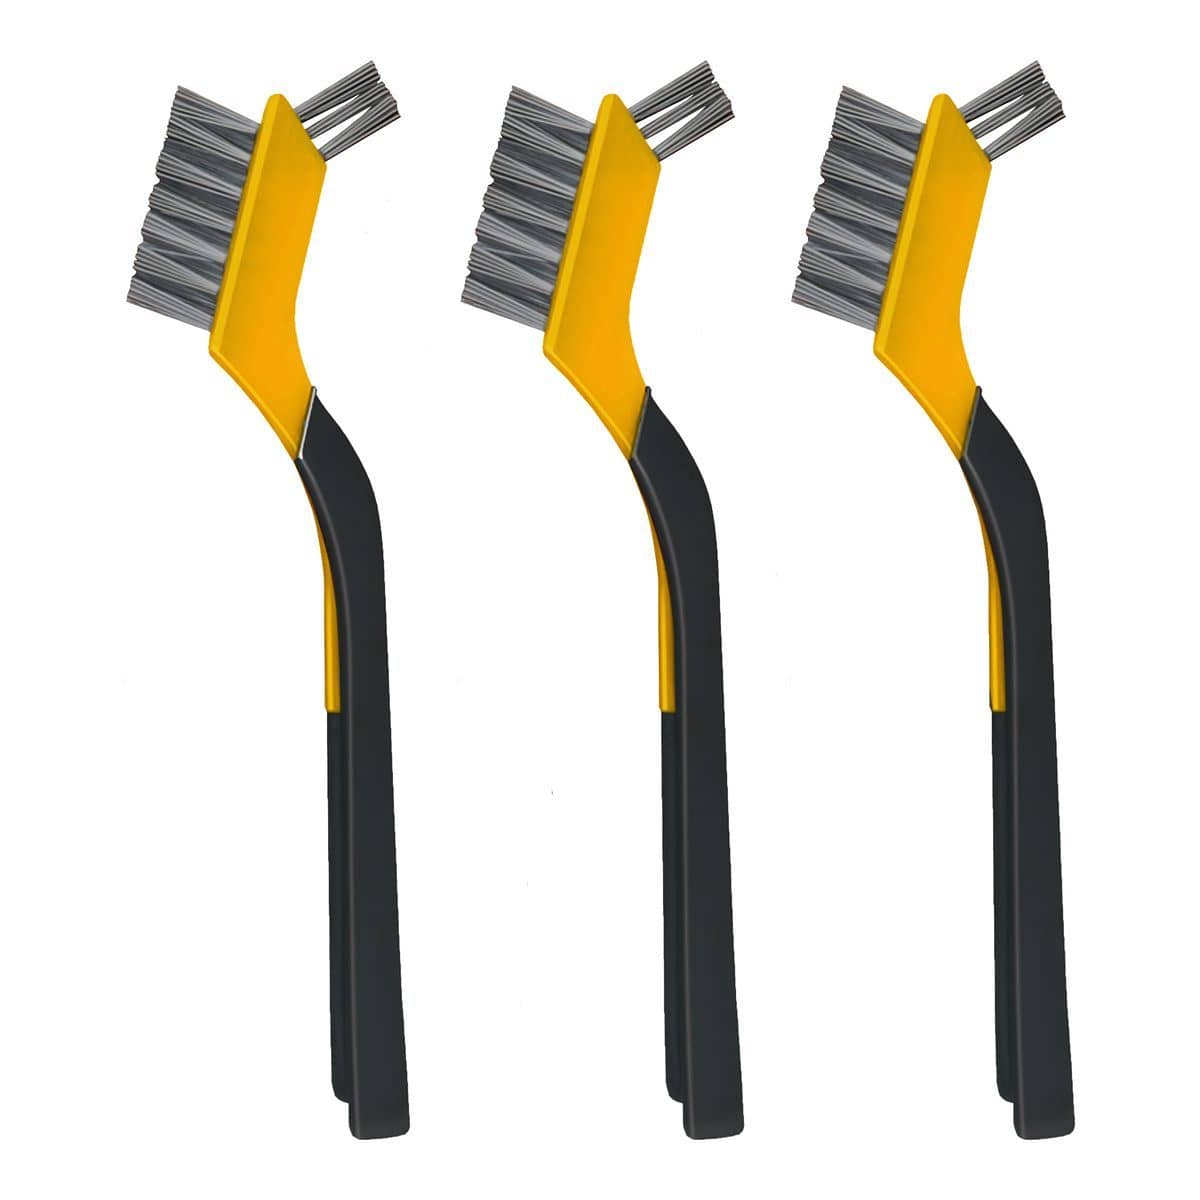 AMB) 3-Piece Soft-Grip Mini Stripper Brush Set, Carded » ALLWAY® The Tools  You Ask For By Name